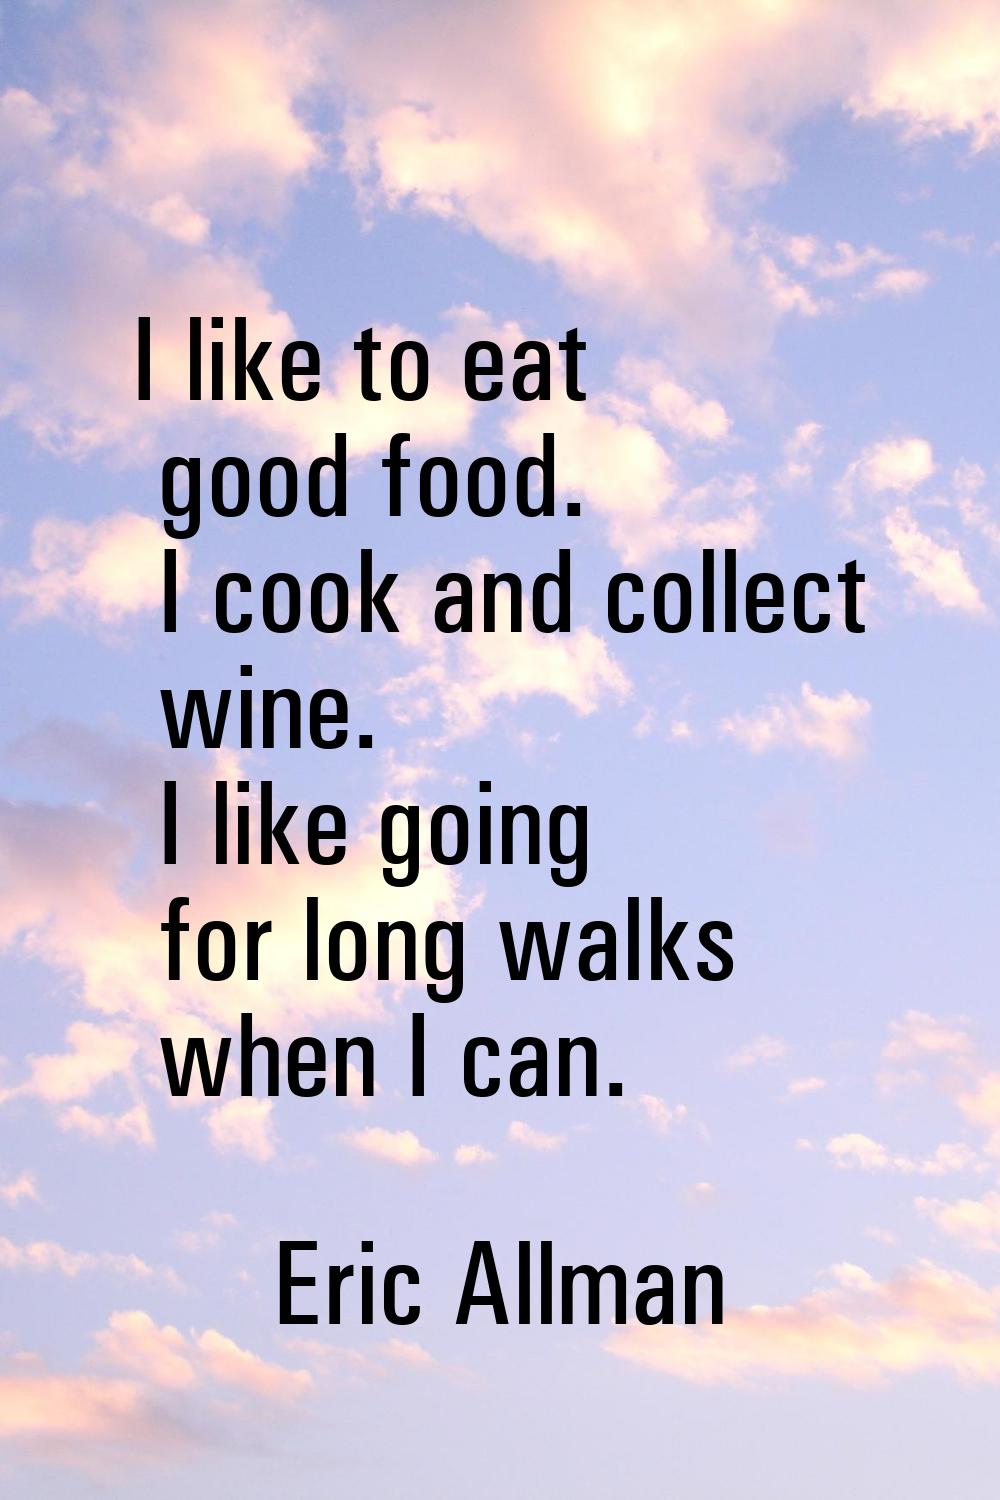 I like to eat good food. I cook and collect wine. I like going for long walks when I can.